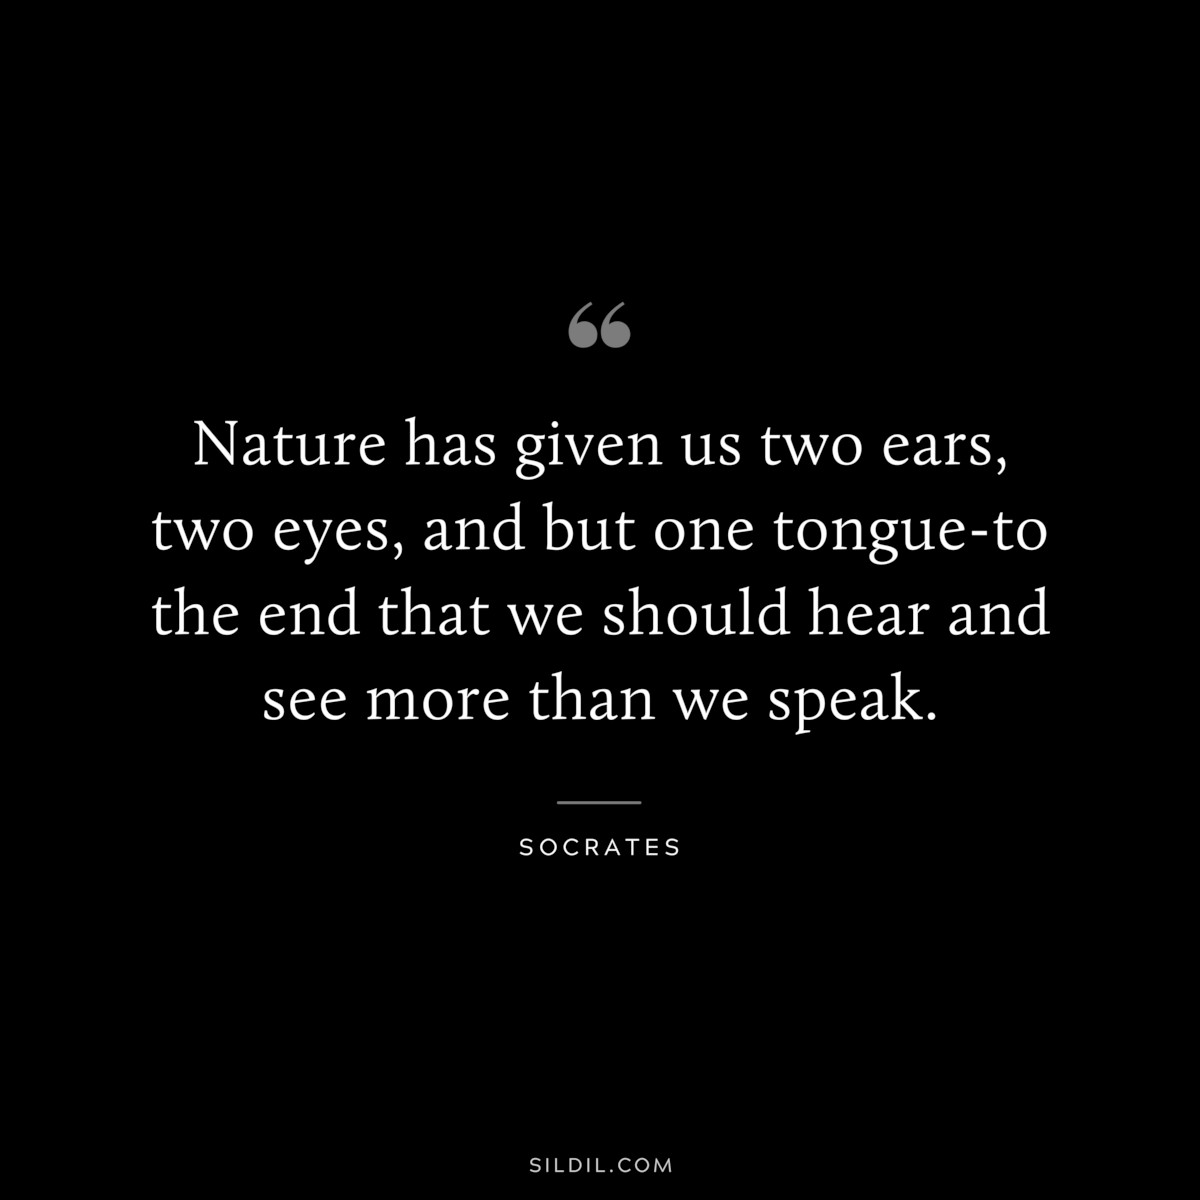 Nature has given us two ears, two eyes, and but one tongue-to the end that we should hear and see more than we speak. ― Socrates